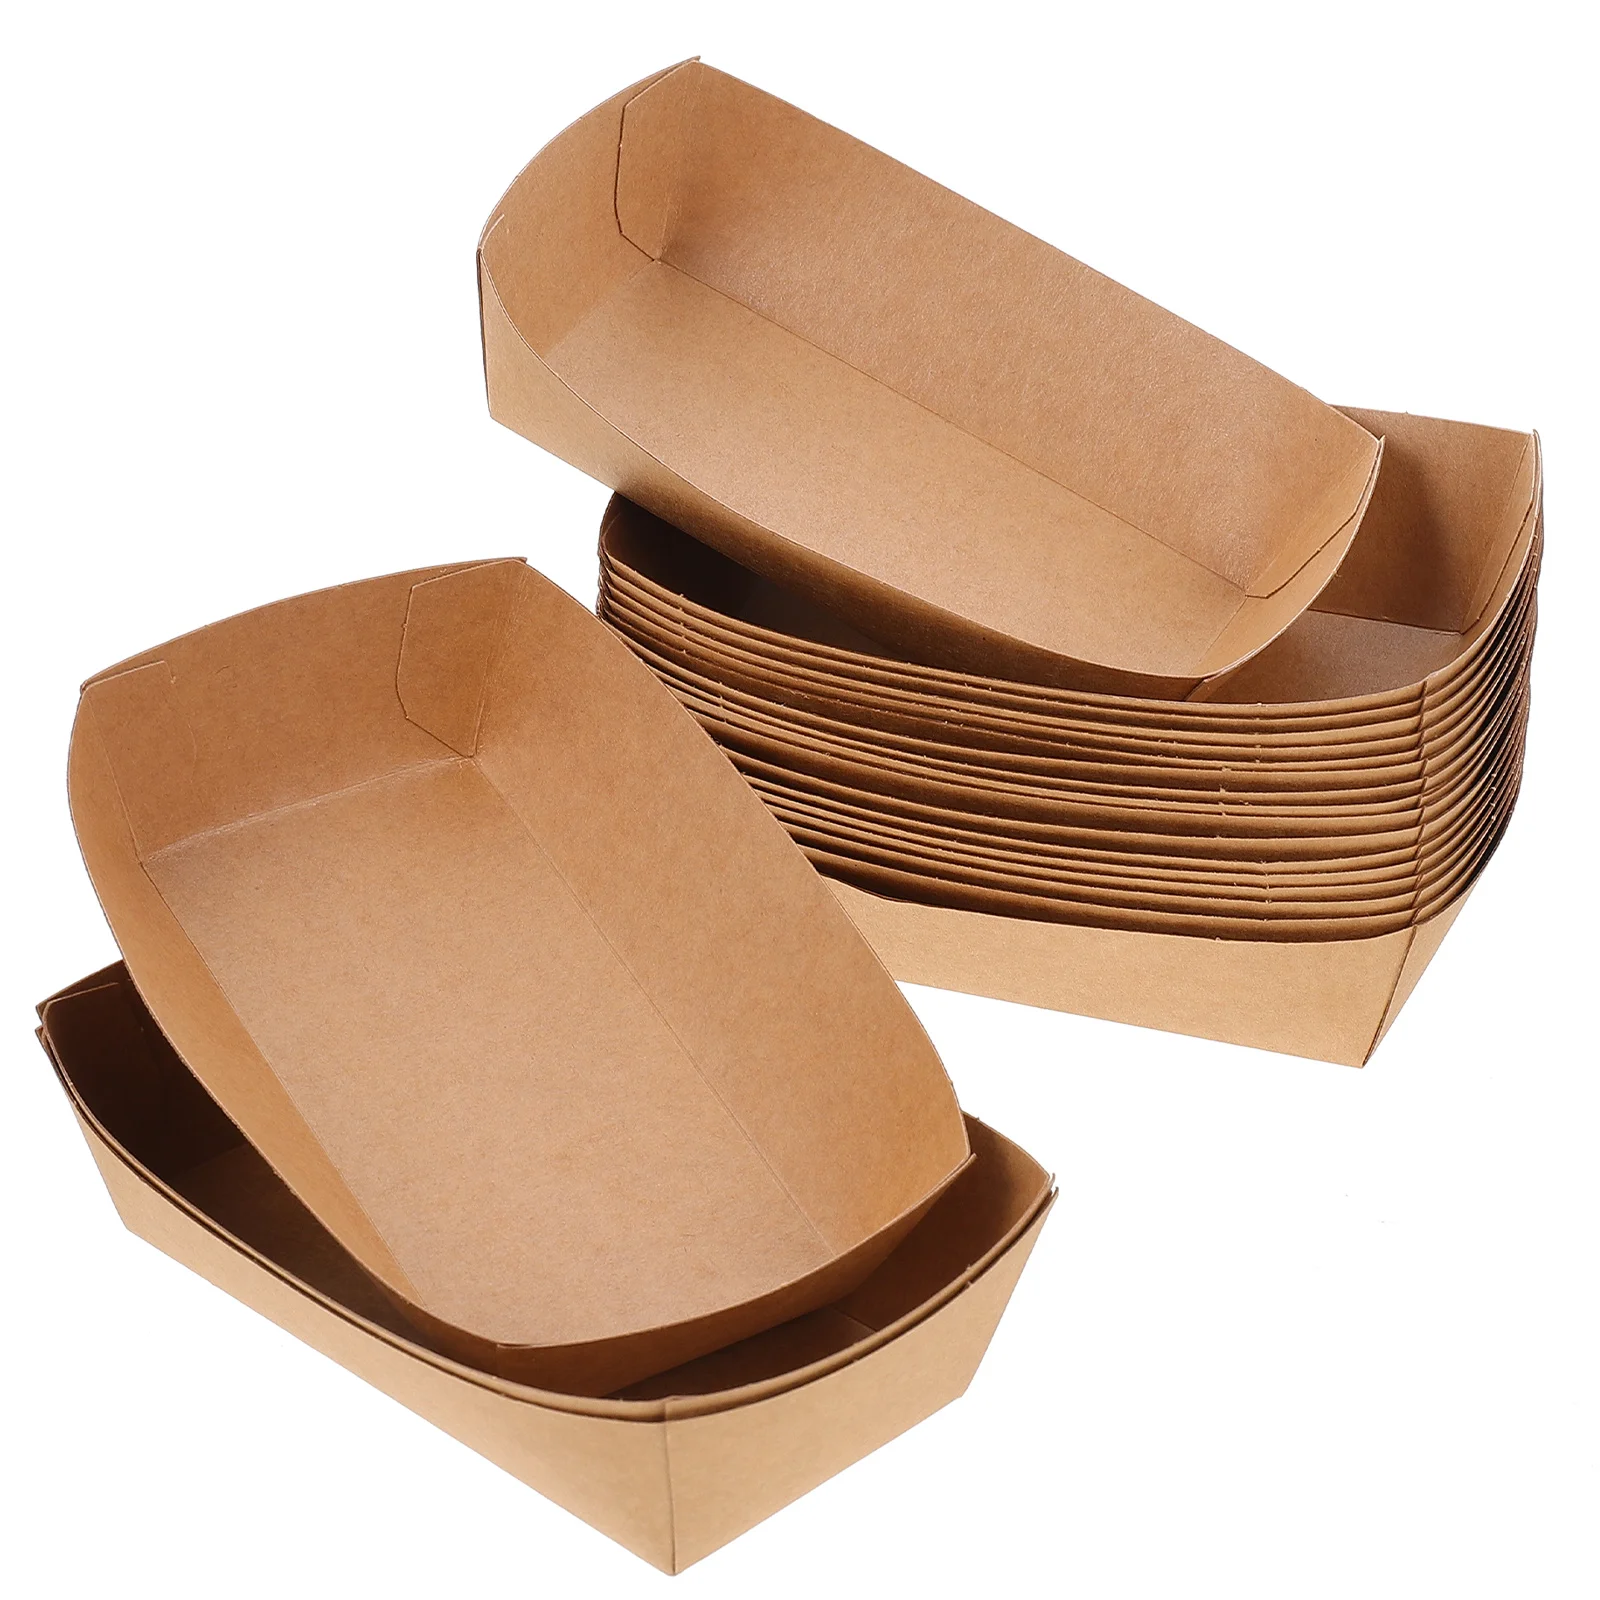 

100 Pcs Oil Proof Box Snack Container Takeout Containers Fried Snacks Holder Storage Food Frying Kraft Paper Stackable Party